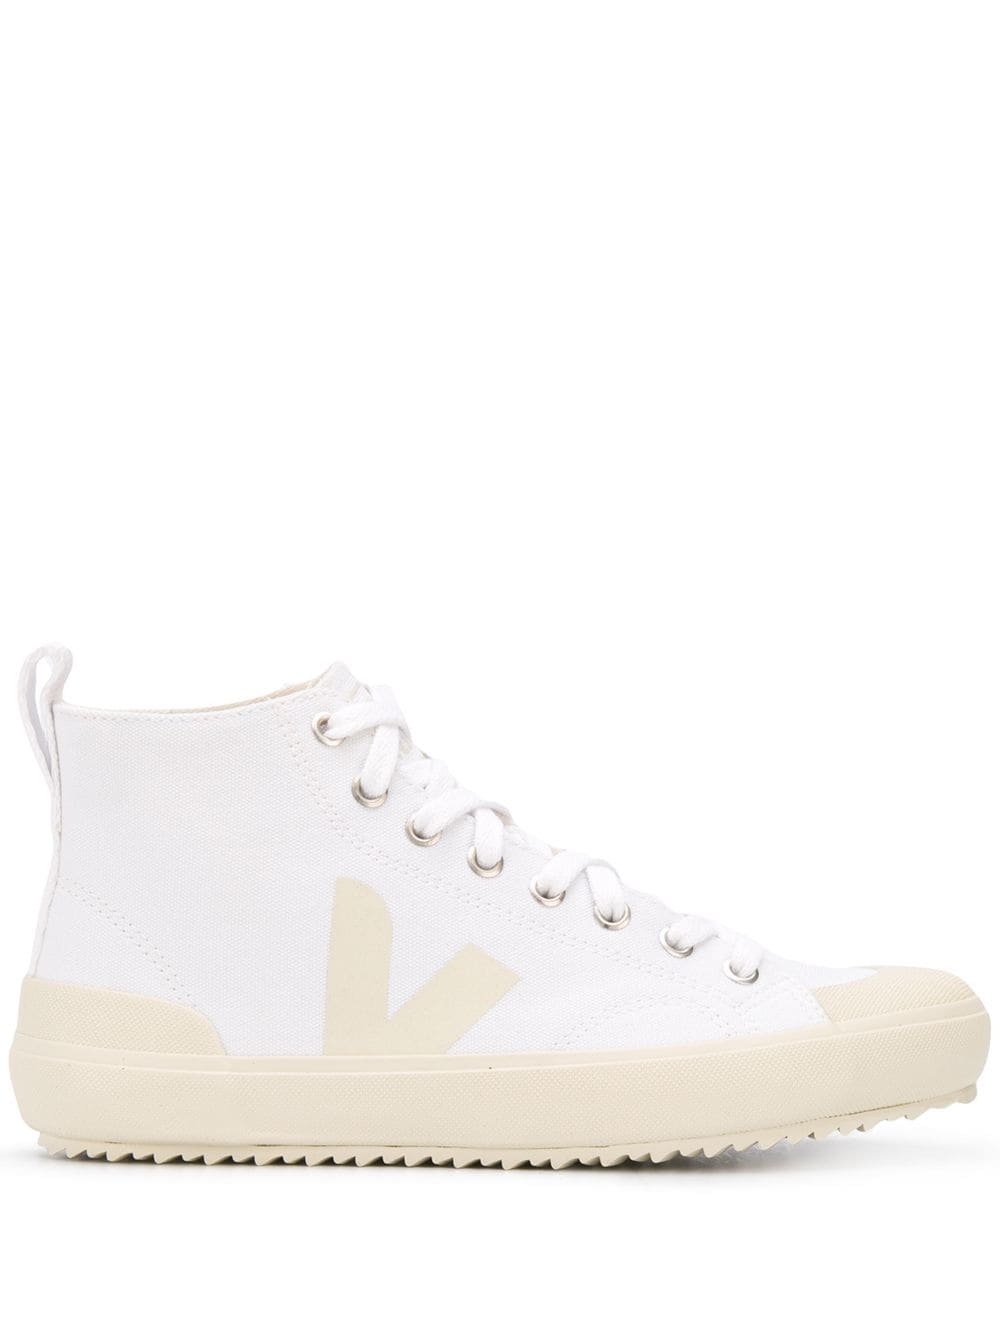 VEJA high top lace-up sneakers - White